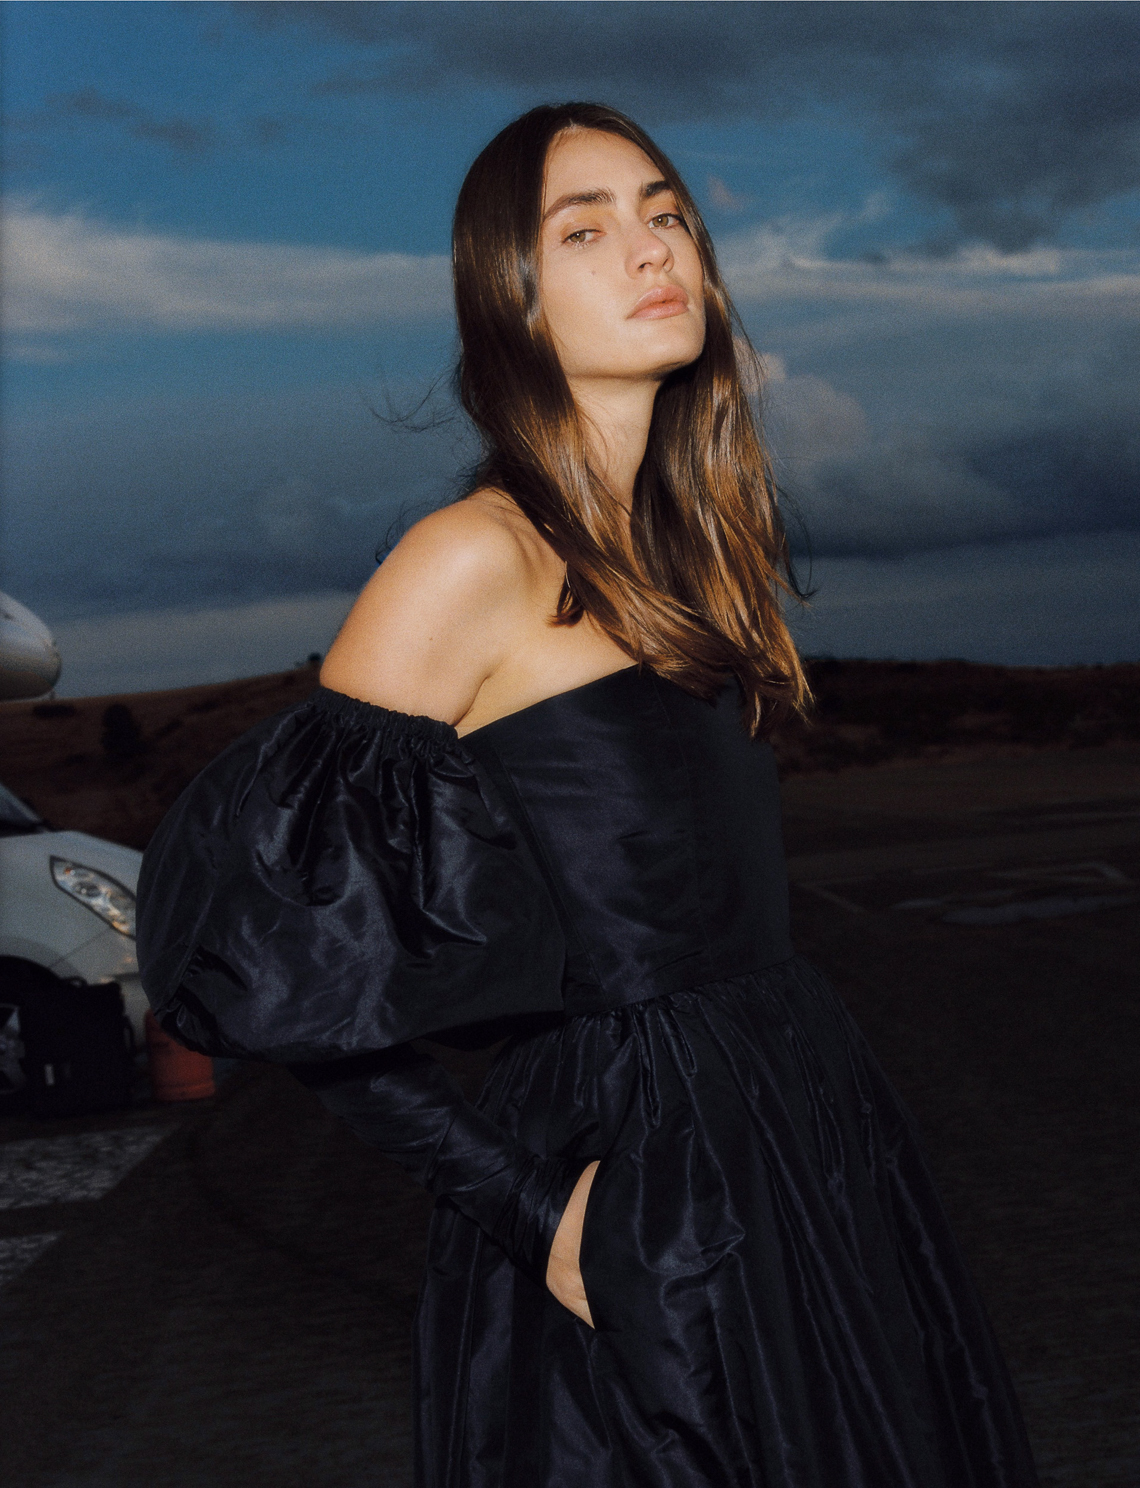 Pablo Curto for InStyle Spain with Marine Deleeuw